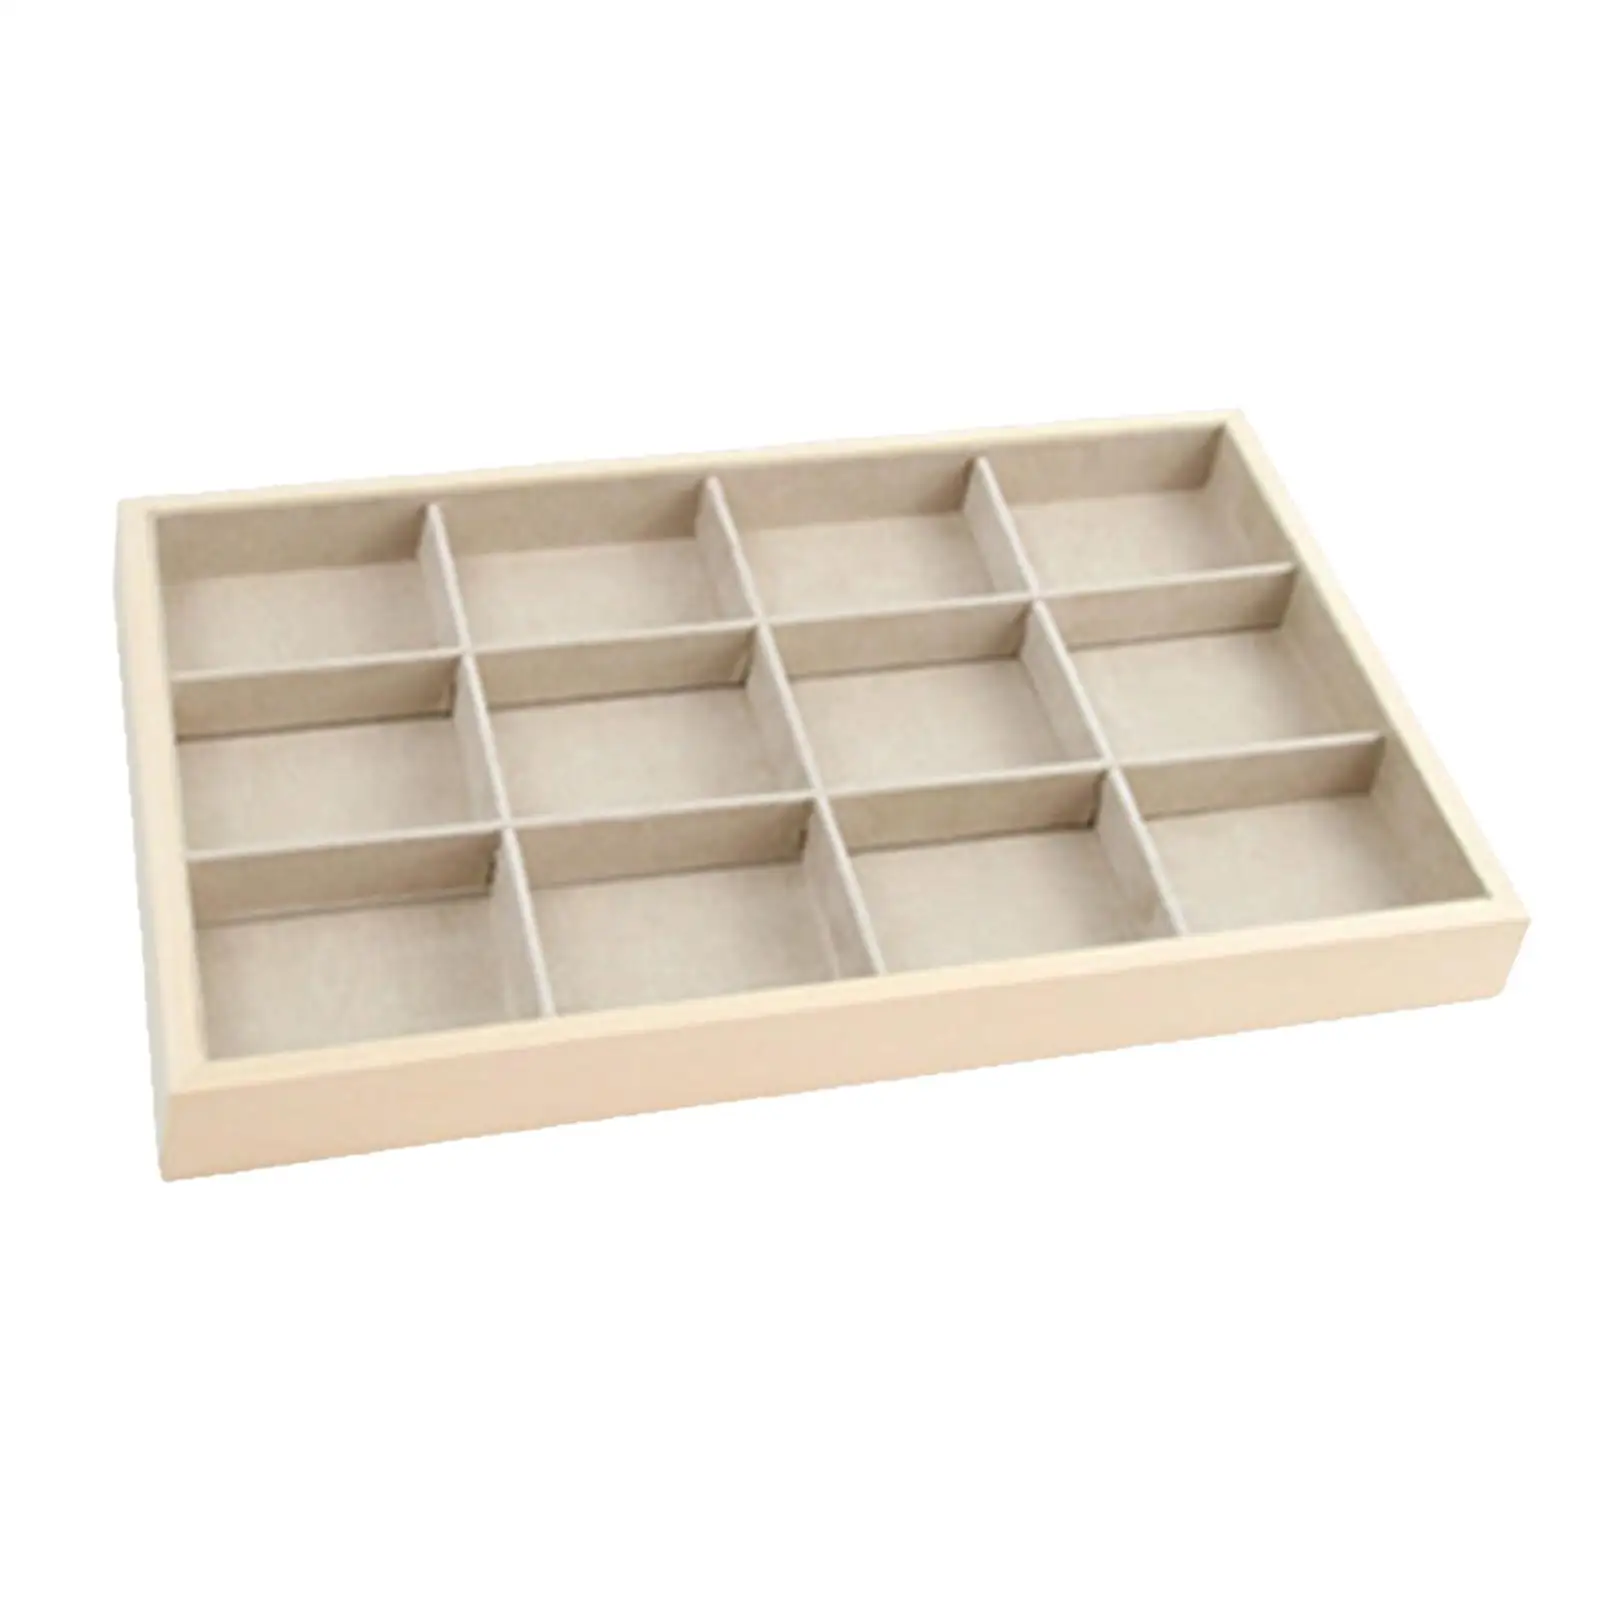 Stackable Jewelry Tray Inserts Storage Display Organiser Container Box Wood for Necklace Bracelet Charms Diamond Beads Ring